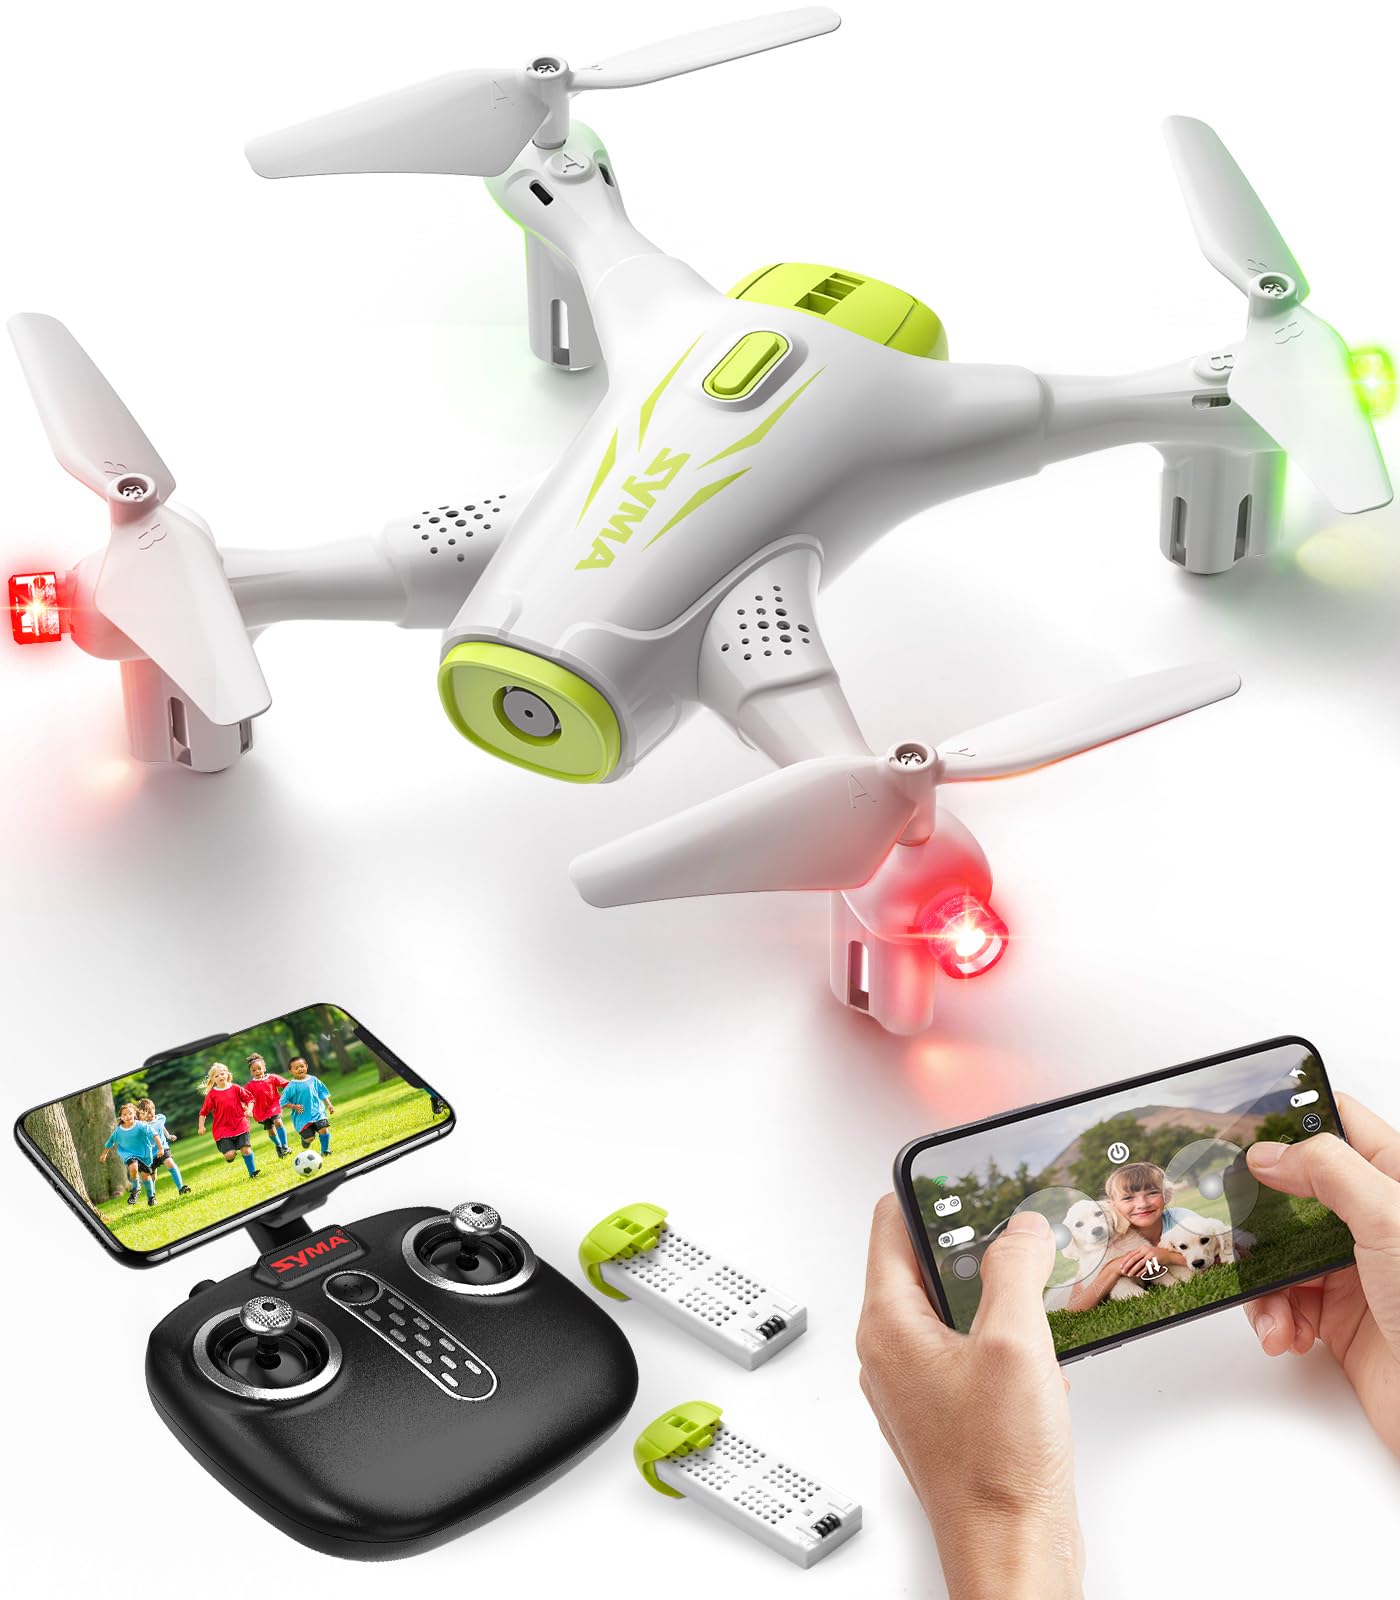 SYMA X400 Mini Drone for Kids with 1080P HD FPV Camera Remote Control Quadcopter Toys Gifts for Boys Girls with Altitude Hold, 3D Flip, One Key Function, Headless Mode, 2 Batteries, White